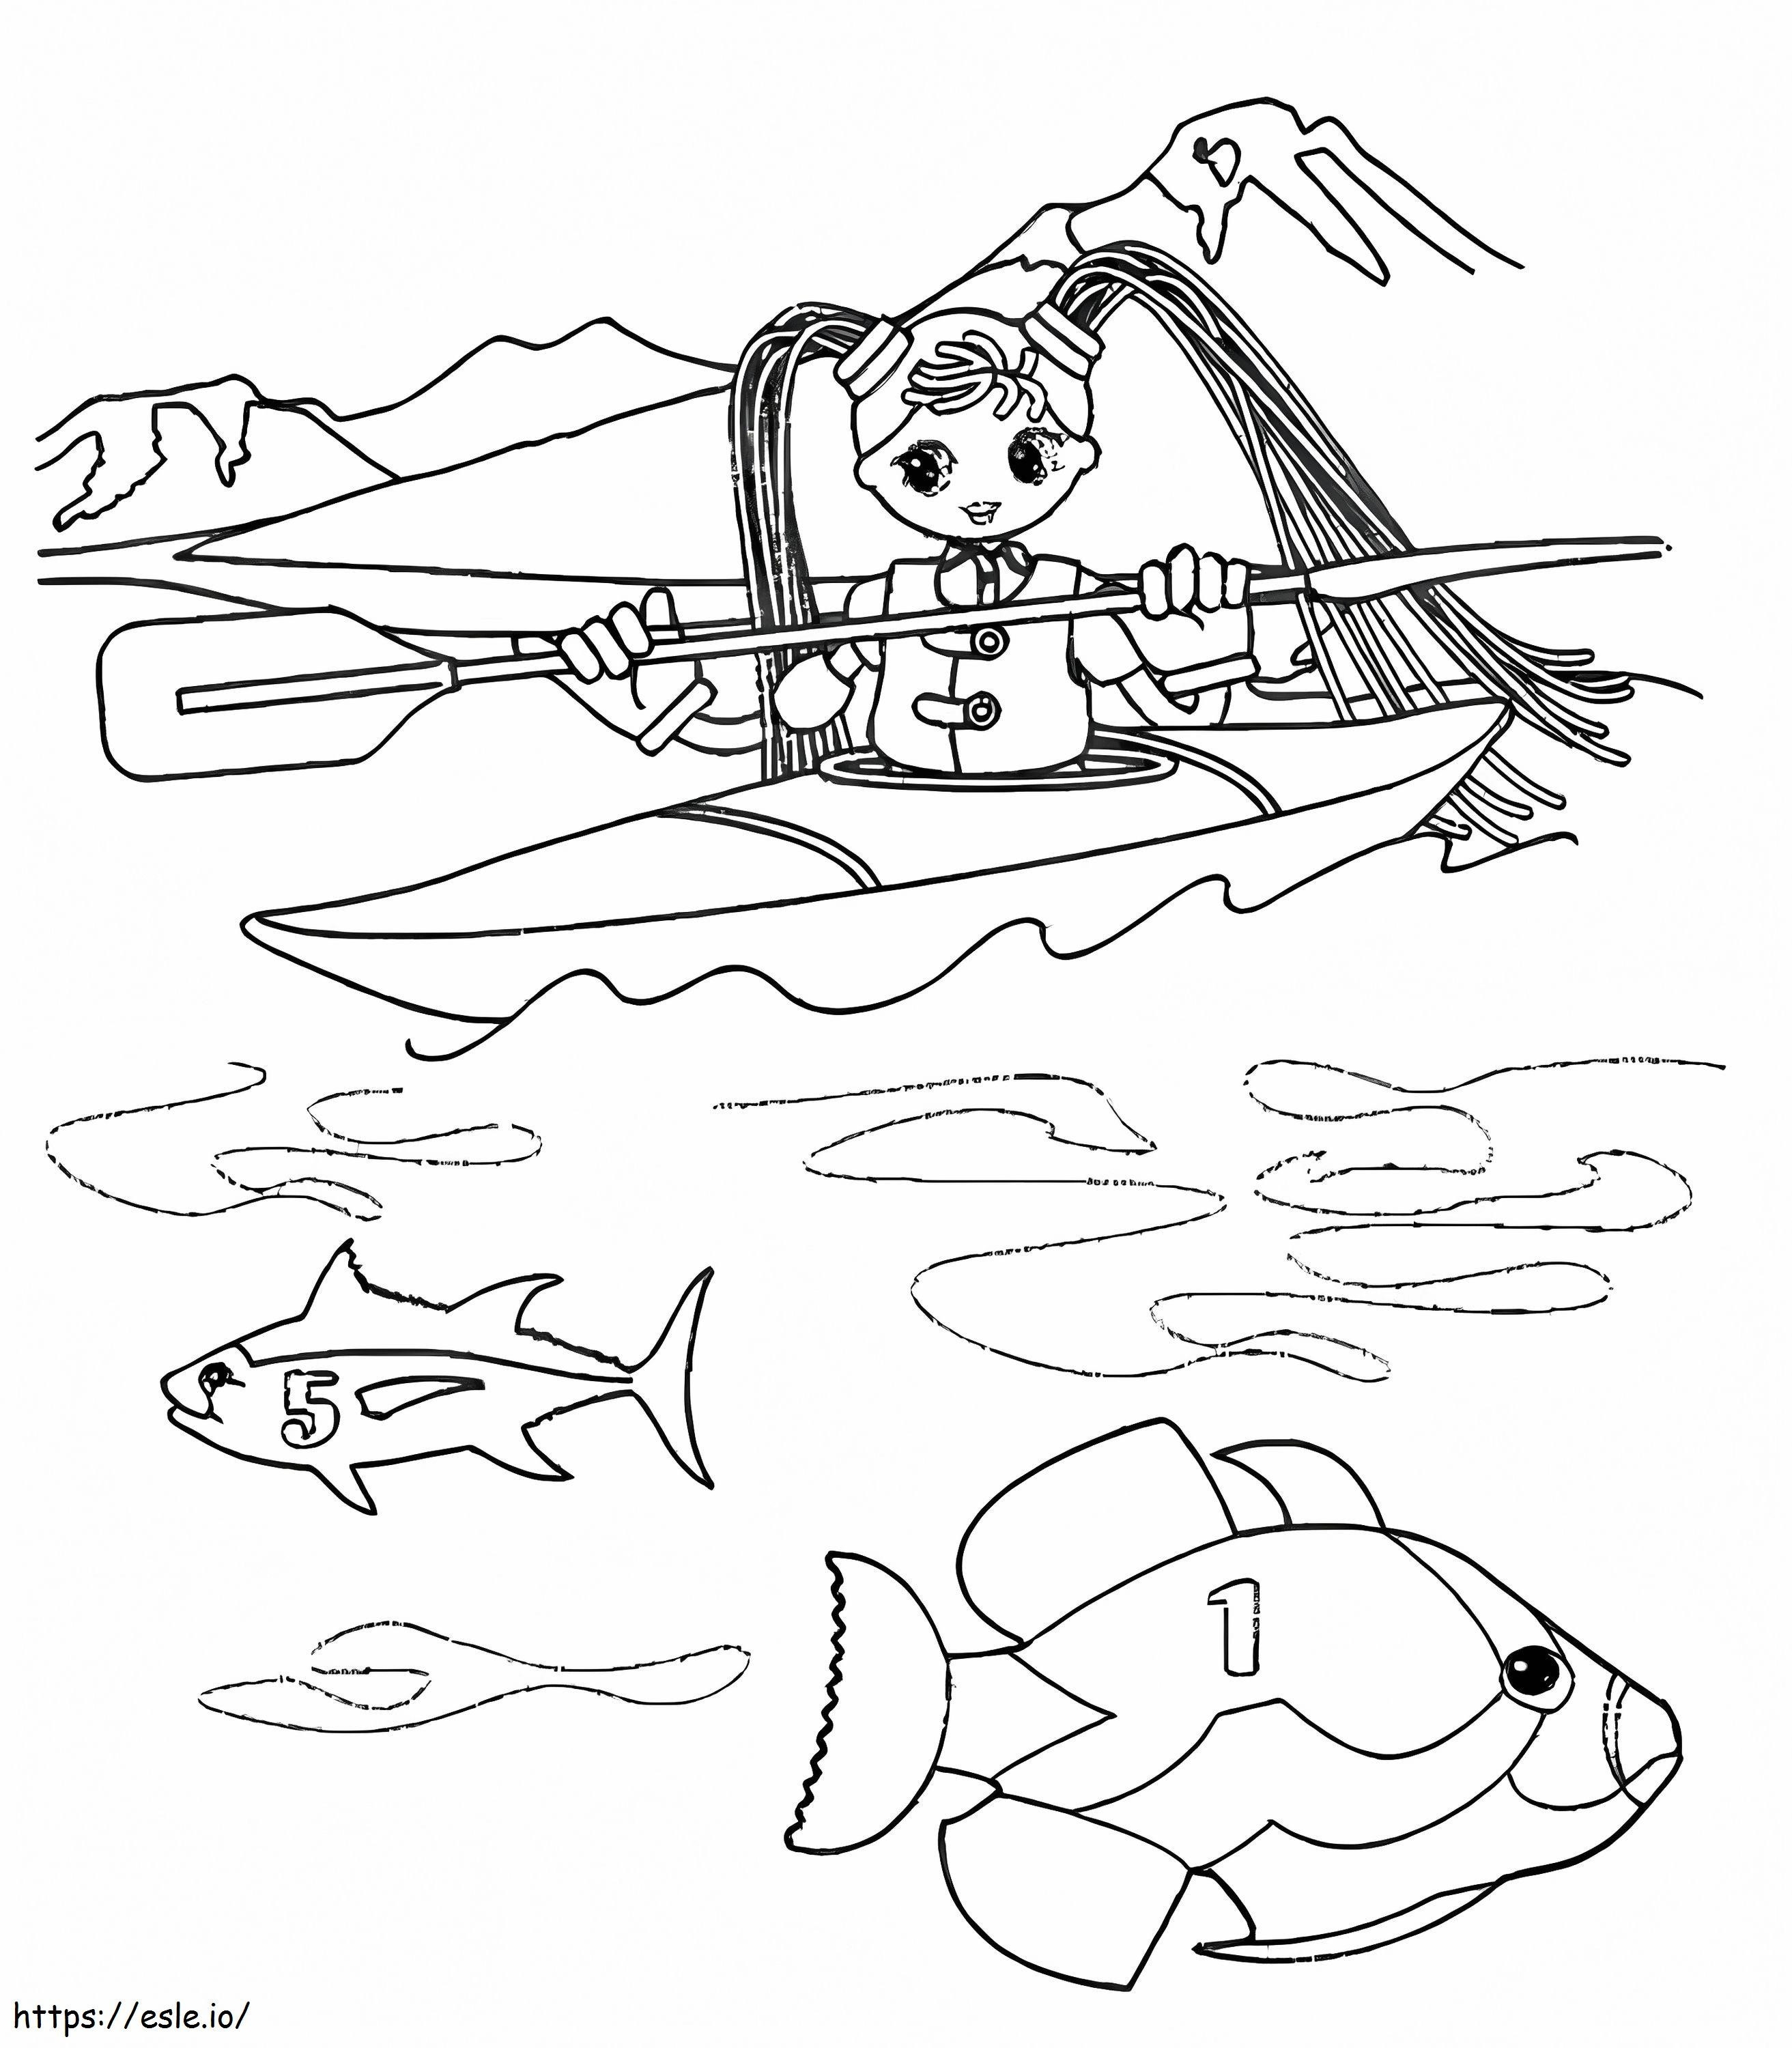 Betty On Boat coloring page